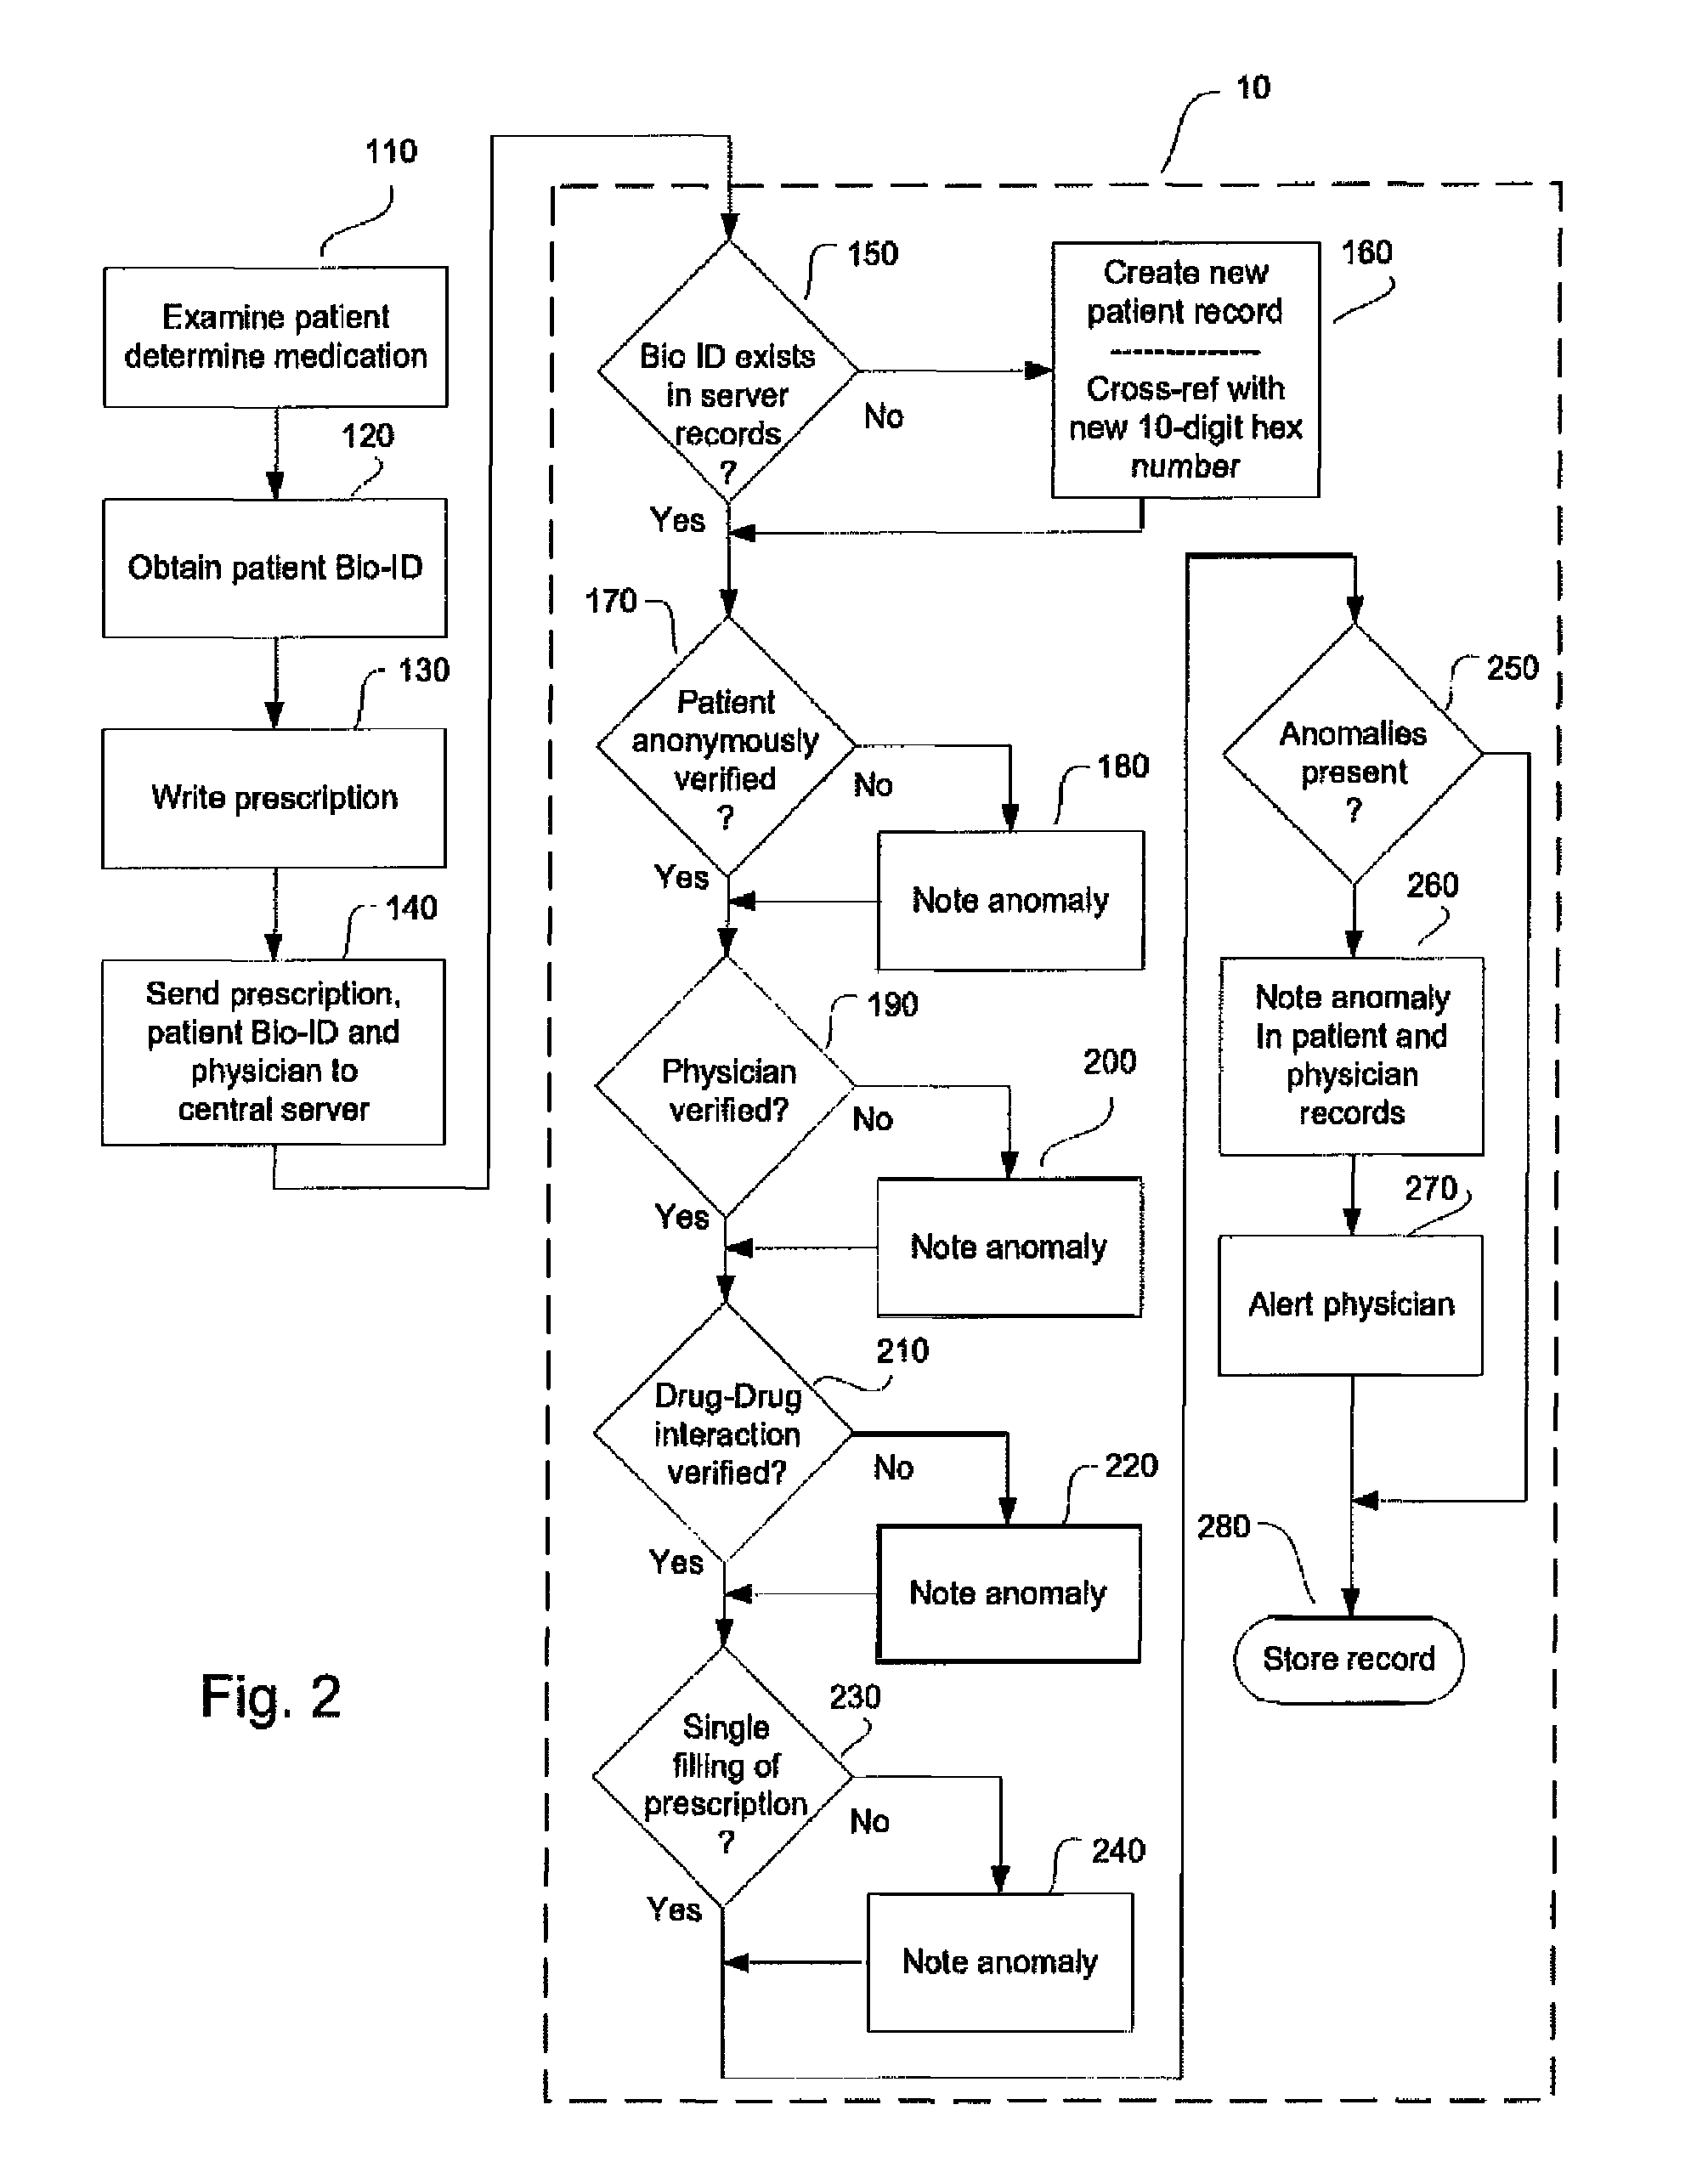 System and method for monitoring medication prescriptions using biometric identification and verification